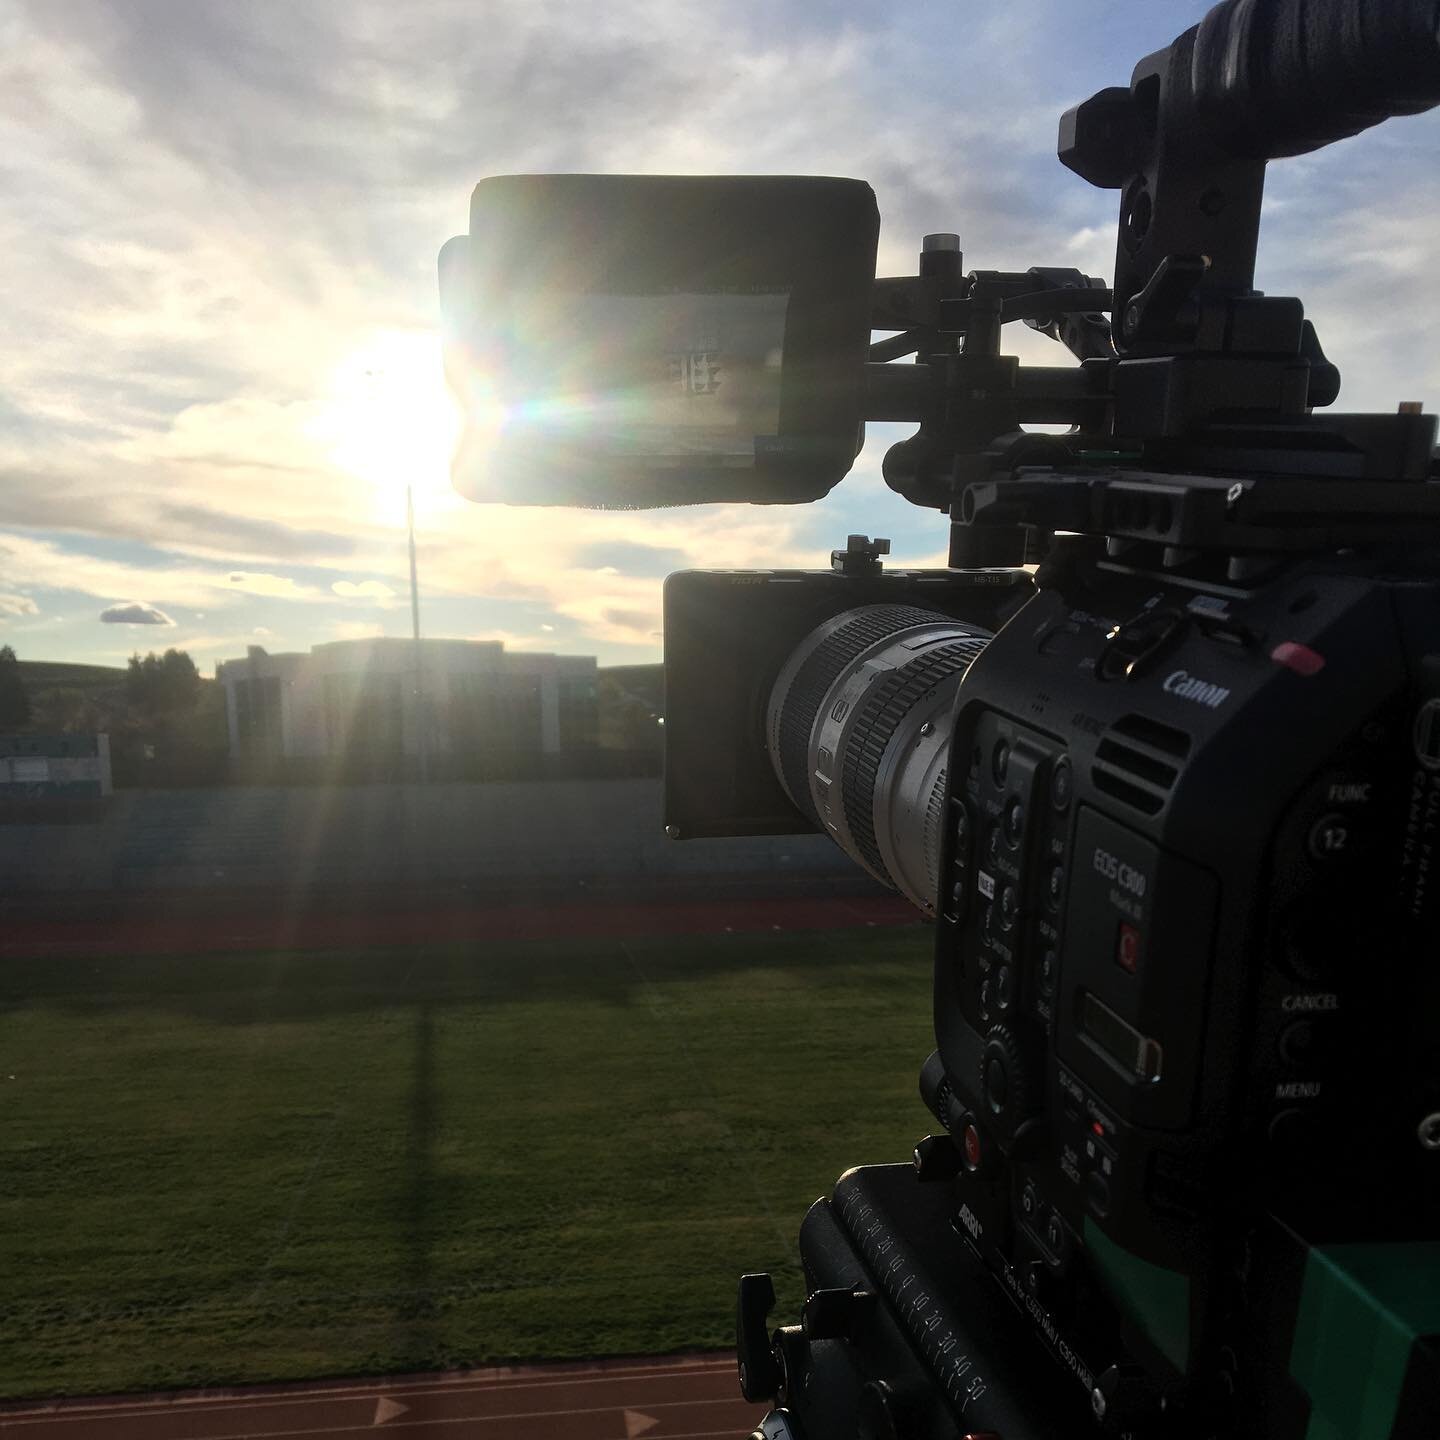 One year later. We&rsquo;re reflecting on the loss, but hopeful that a new day is coming. 

#canonc300 #documentary #indiefilmmaking #sunset #femalefilmmaker